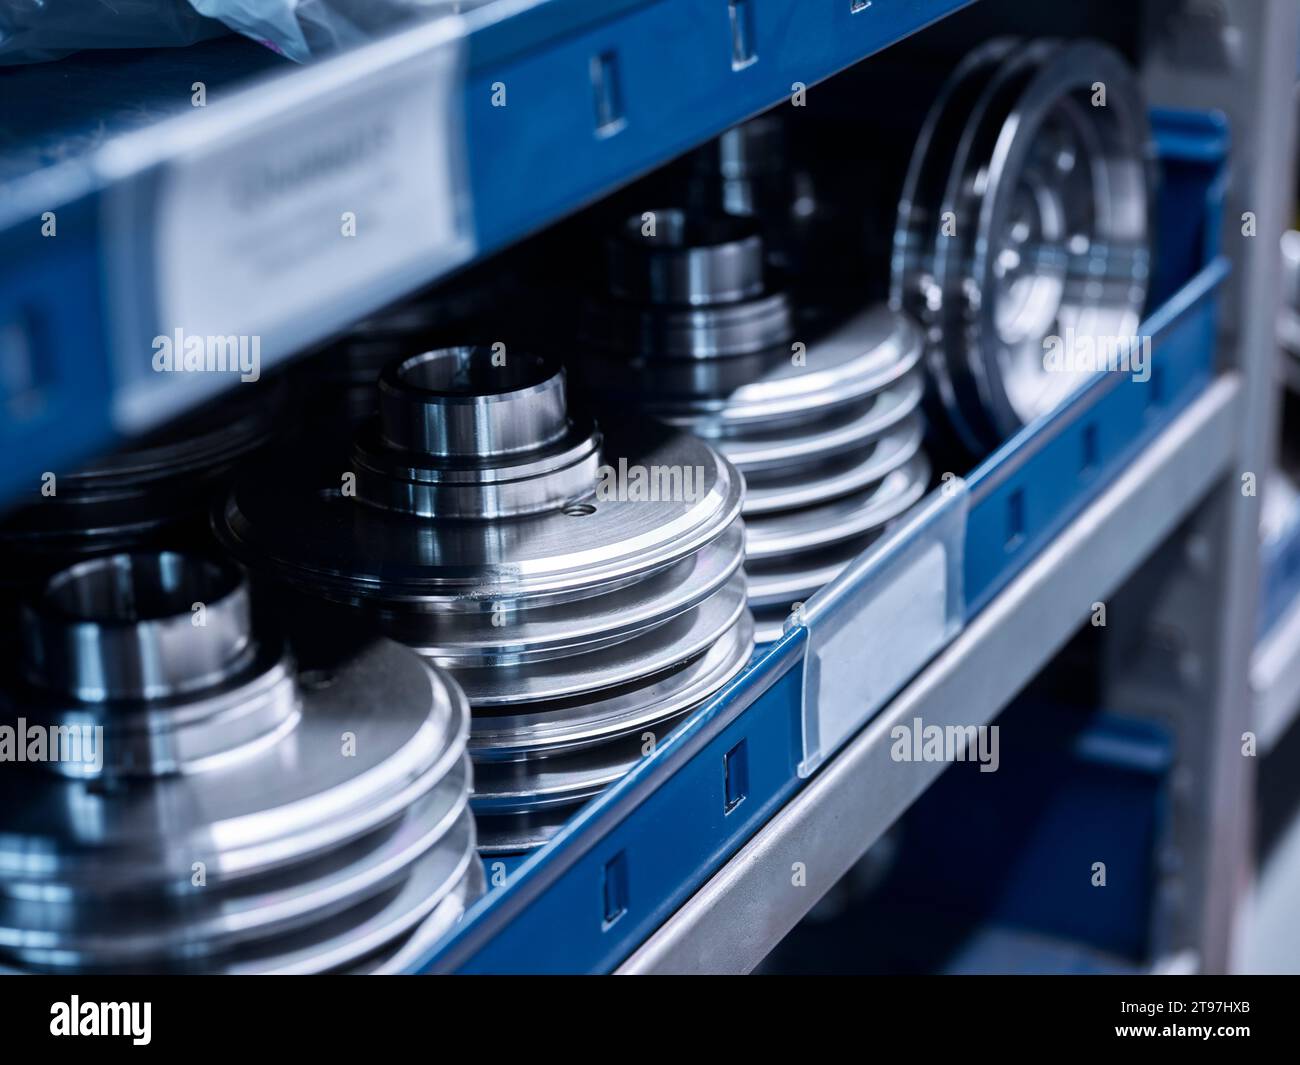 Metal spare parts on shelf at warehouse Stock Photo